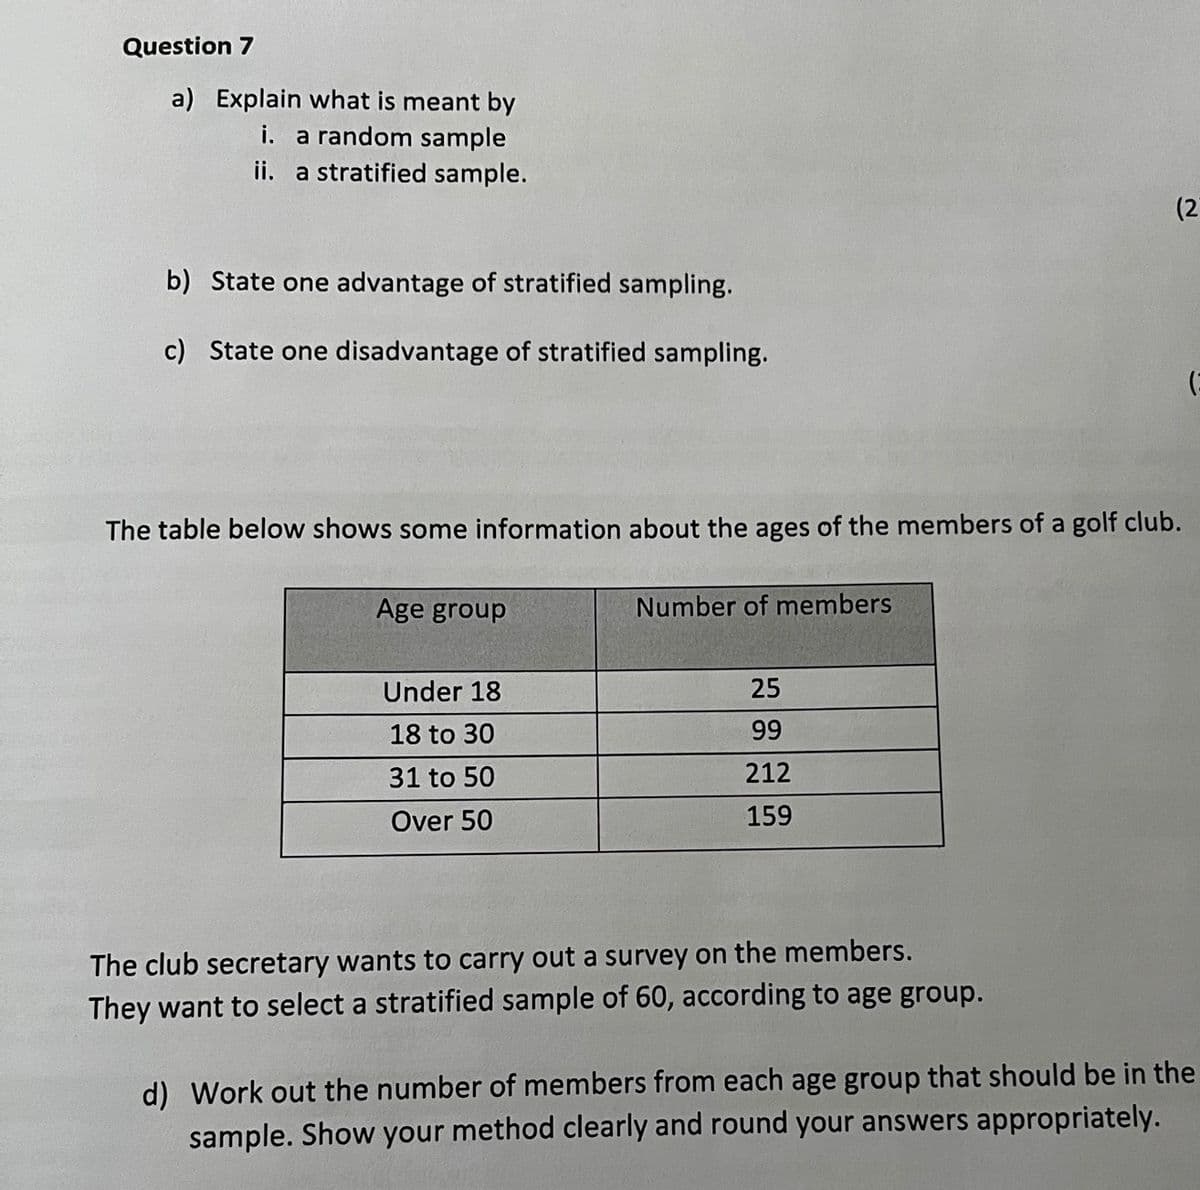 Question 7
a) Explain what is meant by
i. a random sample
ii. a stratified sample.
(2
b) State one advantage of stratified sampling.
c) State one disadvantage of stratified sampling.
The table below shows some information about the ages of the members of a golf club.
Age group
Number of members
Under 18
25
18 to 30
99
31 to 50
212
Over 50
159
The club secretary wants to carry out a survey on the members.
They want to select a stratified sample of 60, according to age group.
d) Work out the number of members from each age group that should be in the
sample. Show your method clearly and round your answers appropriately.
